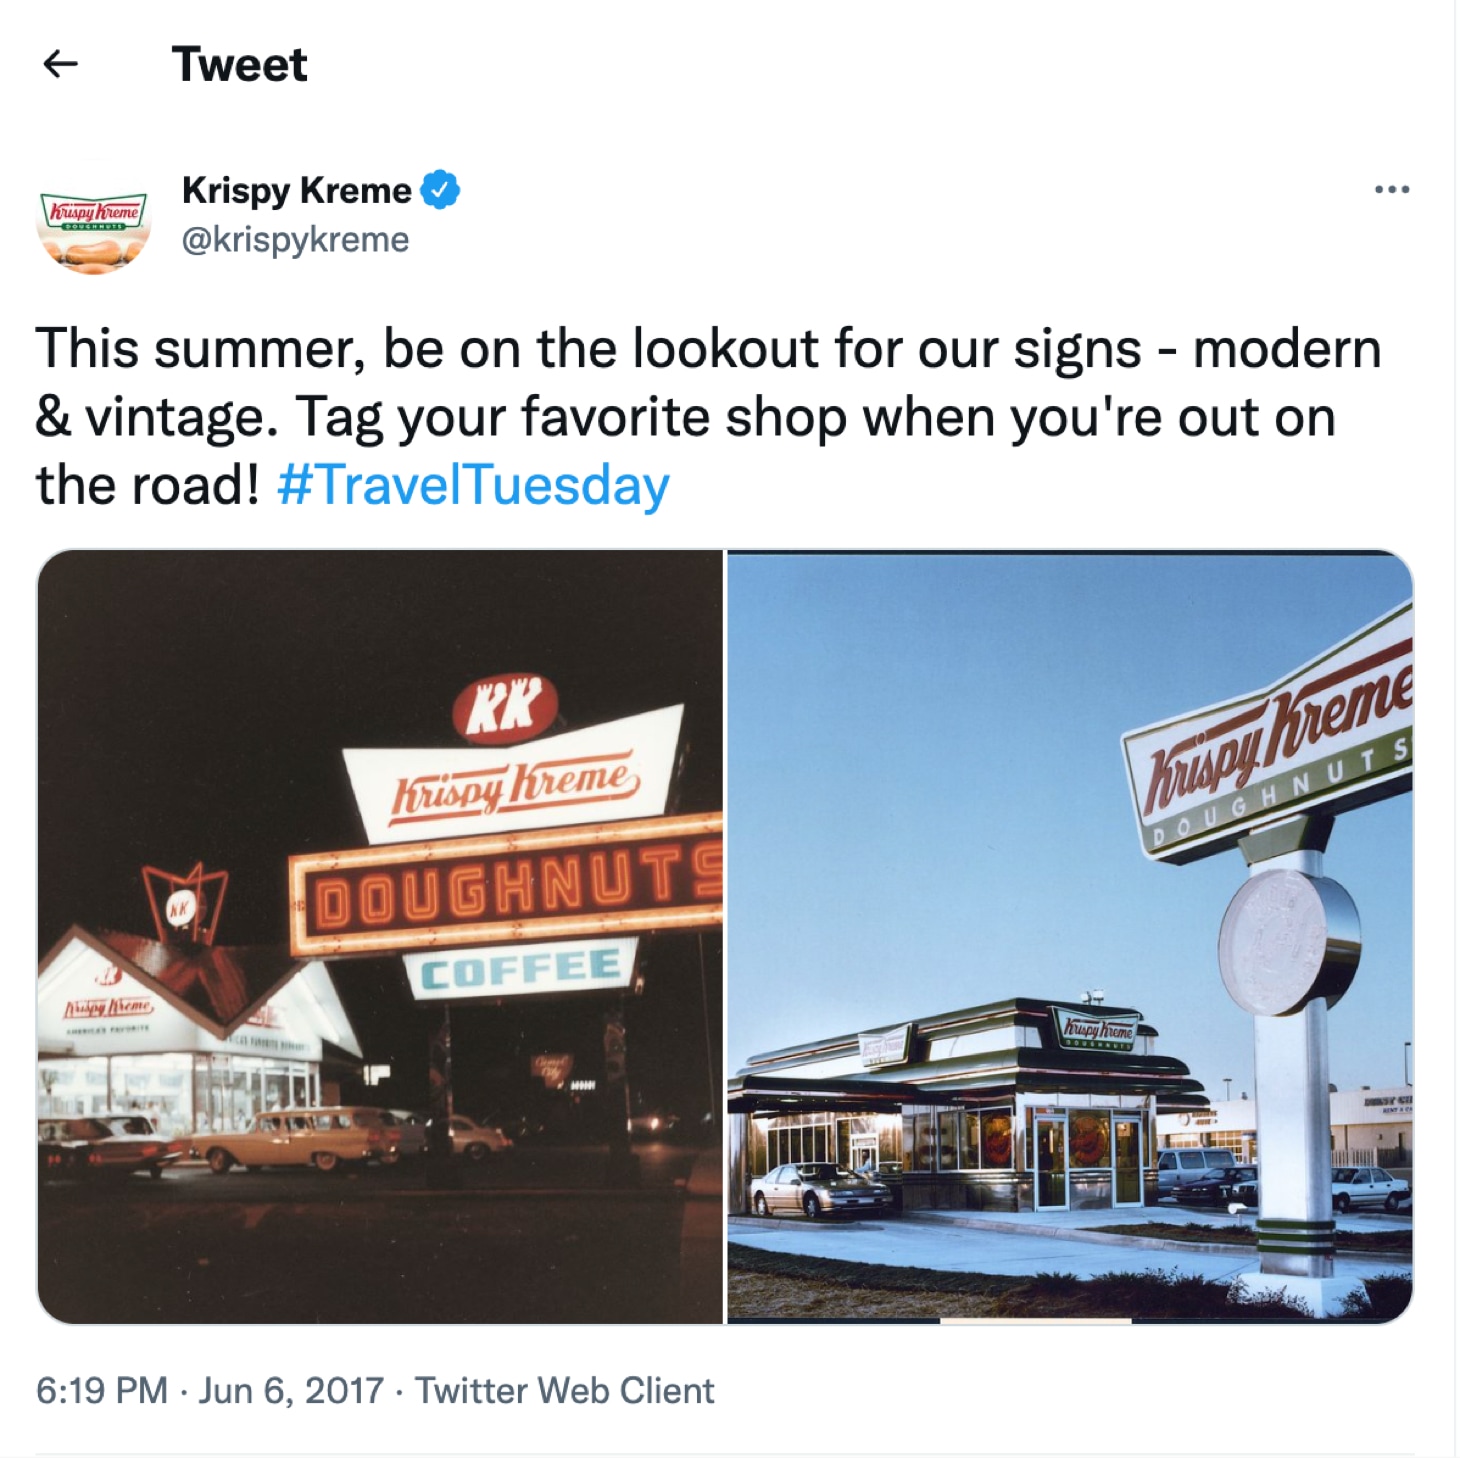 A photo of a dunkin' donuts sign and a dunkin' donuts sign.